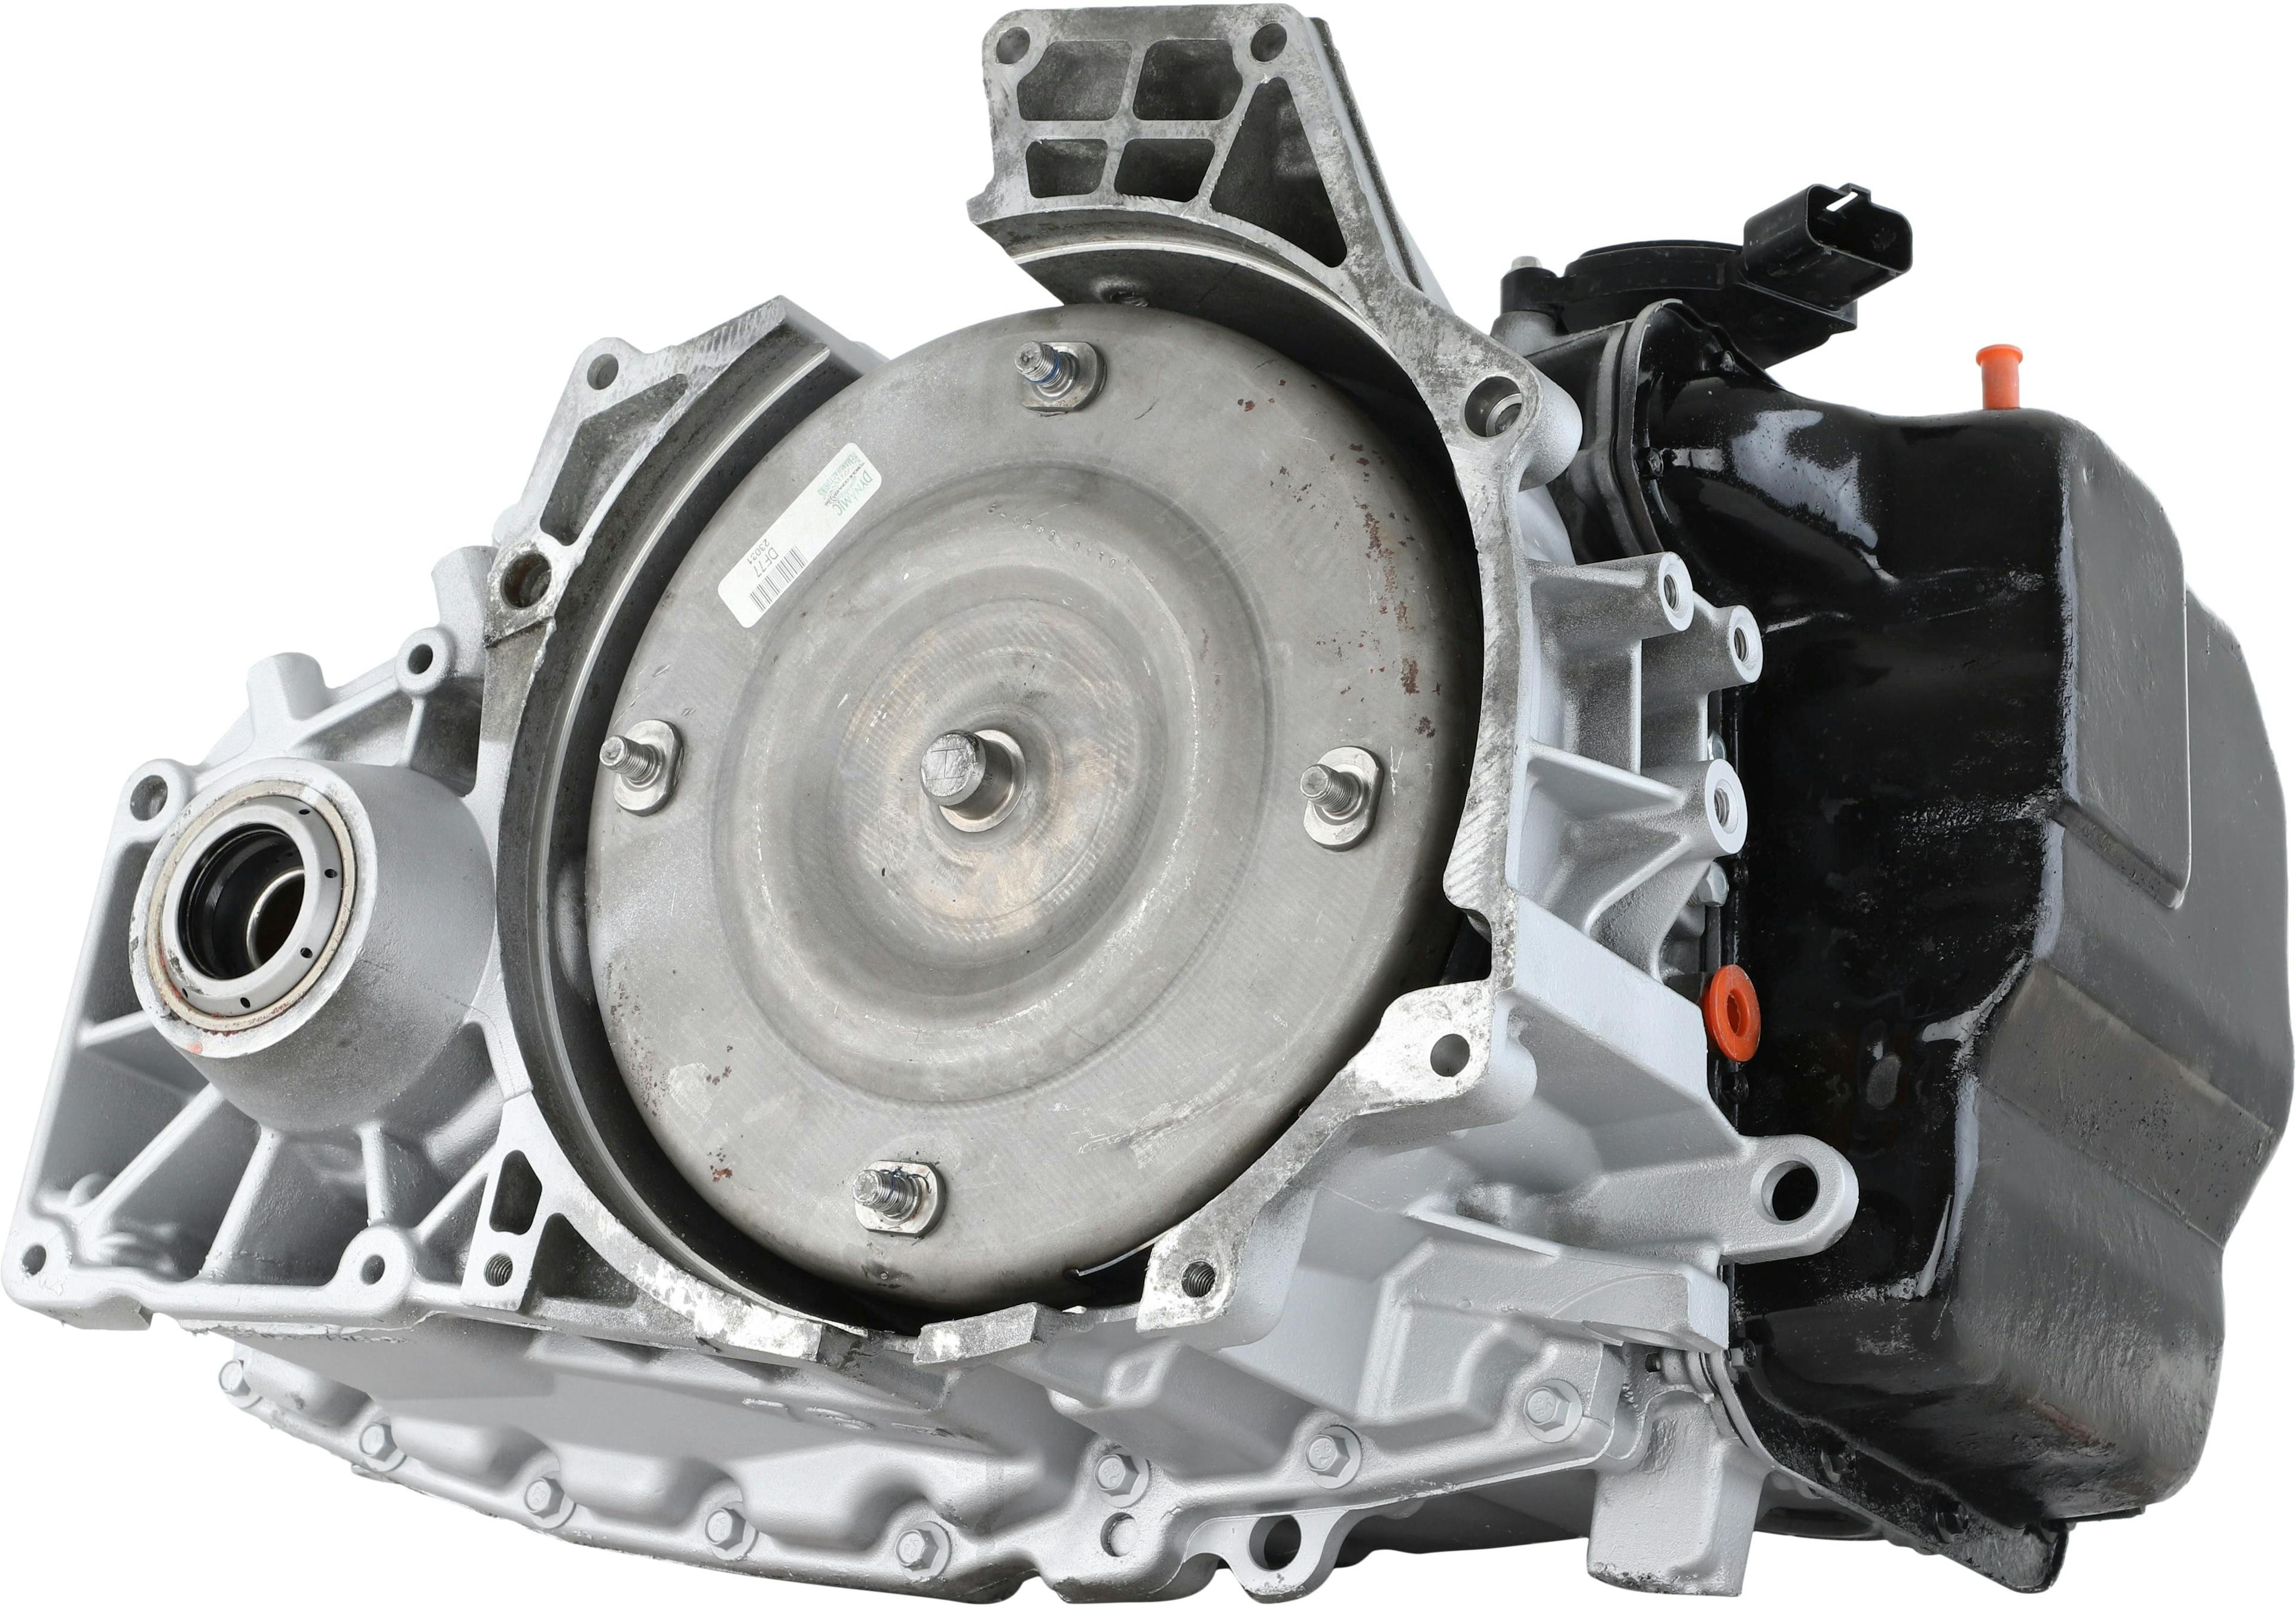 Automatic Transmission for 2003-2008 Ford Escape/Mazda Tribute/Mercury Mariner FWD with 3L V6 Engine